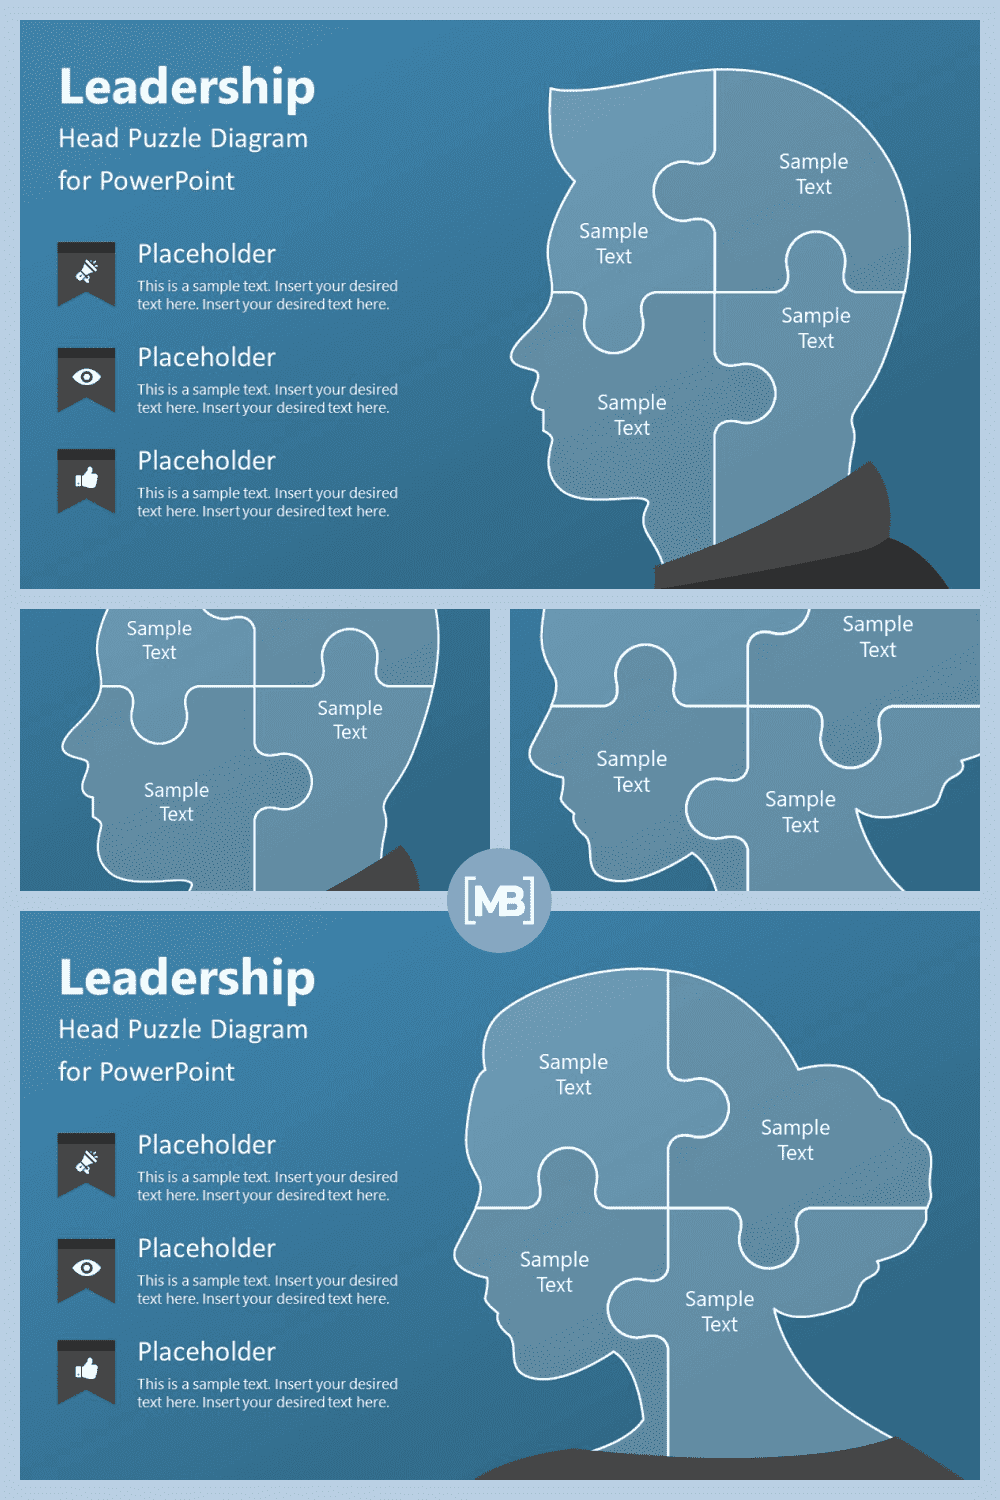 Leadership head diagram template for powerpoint.